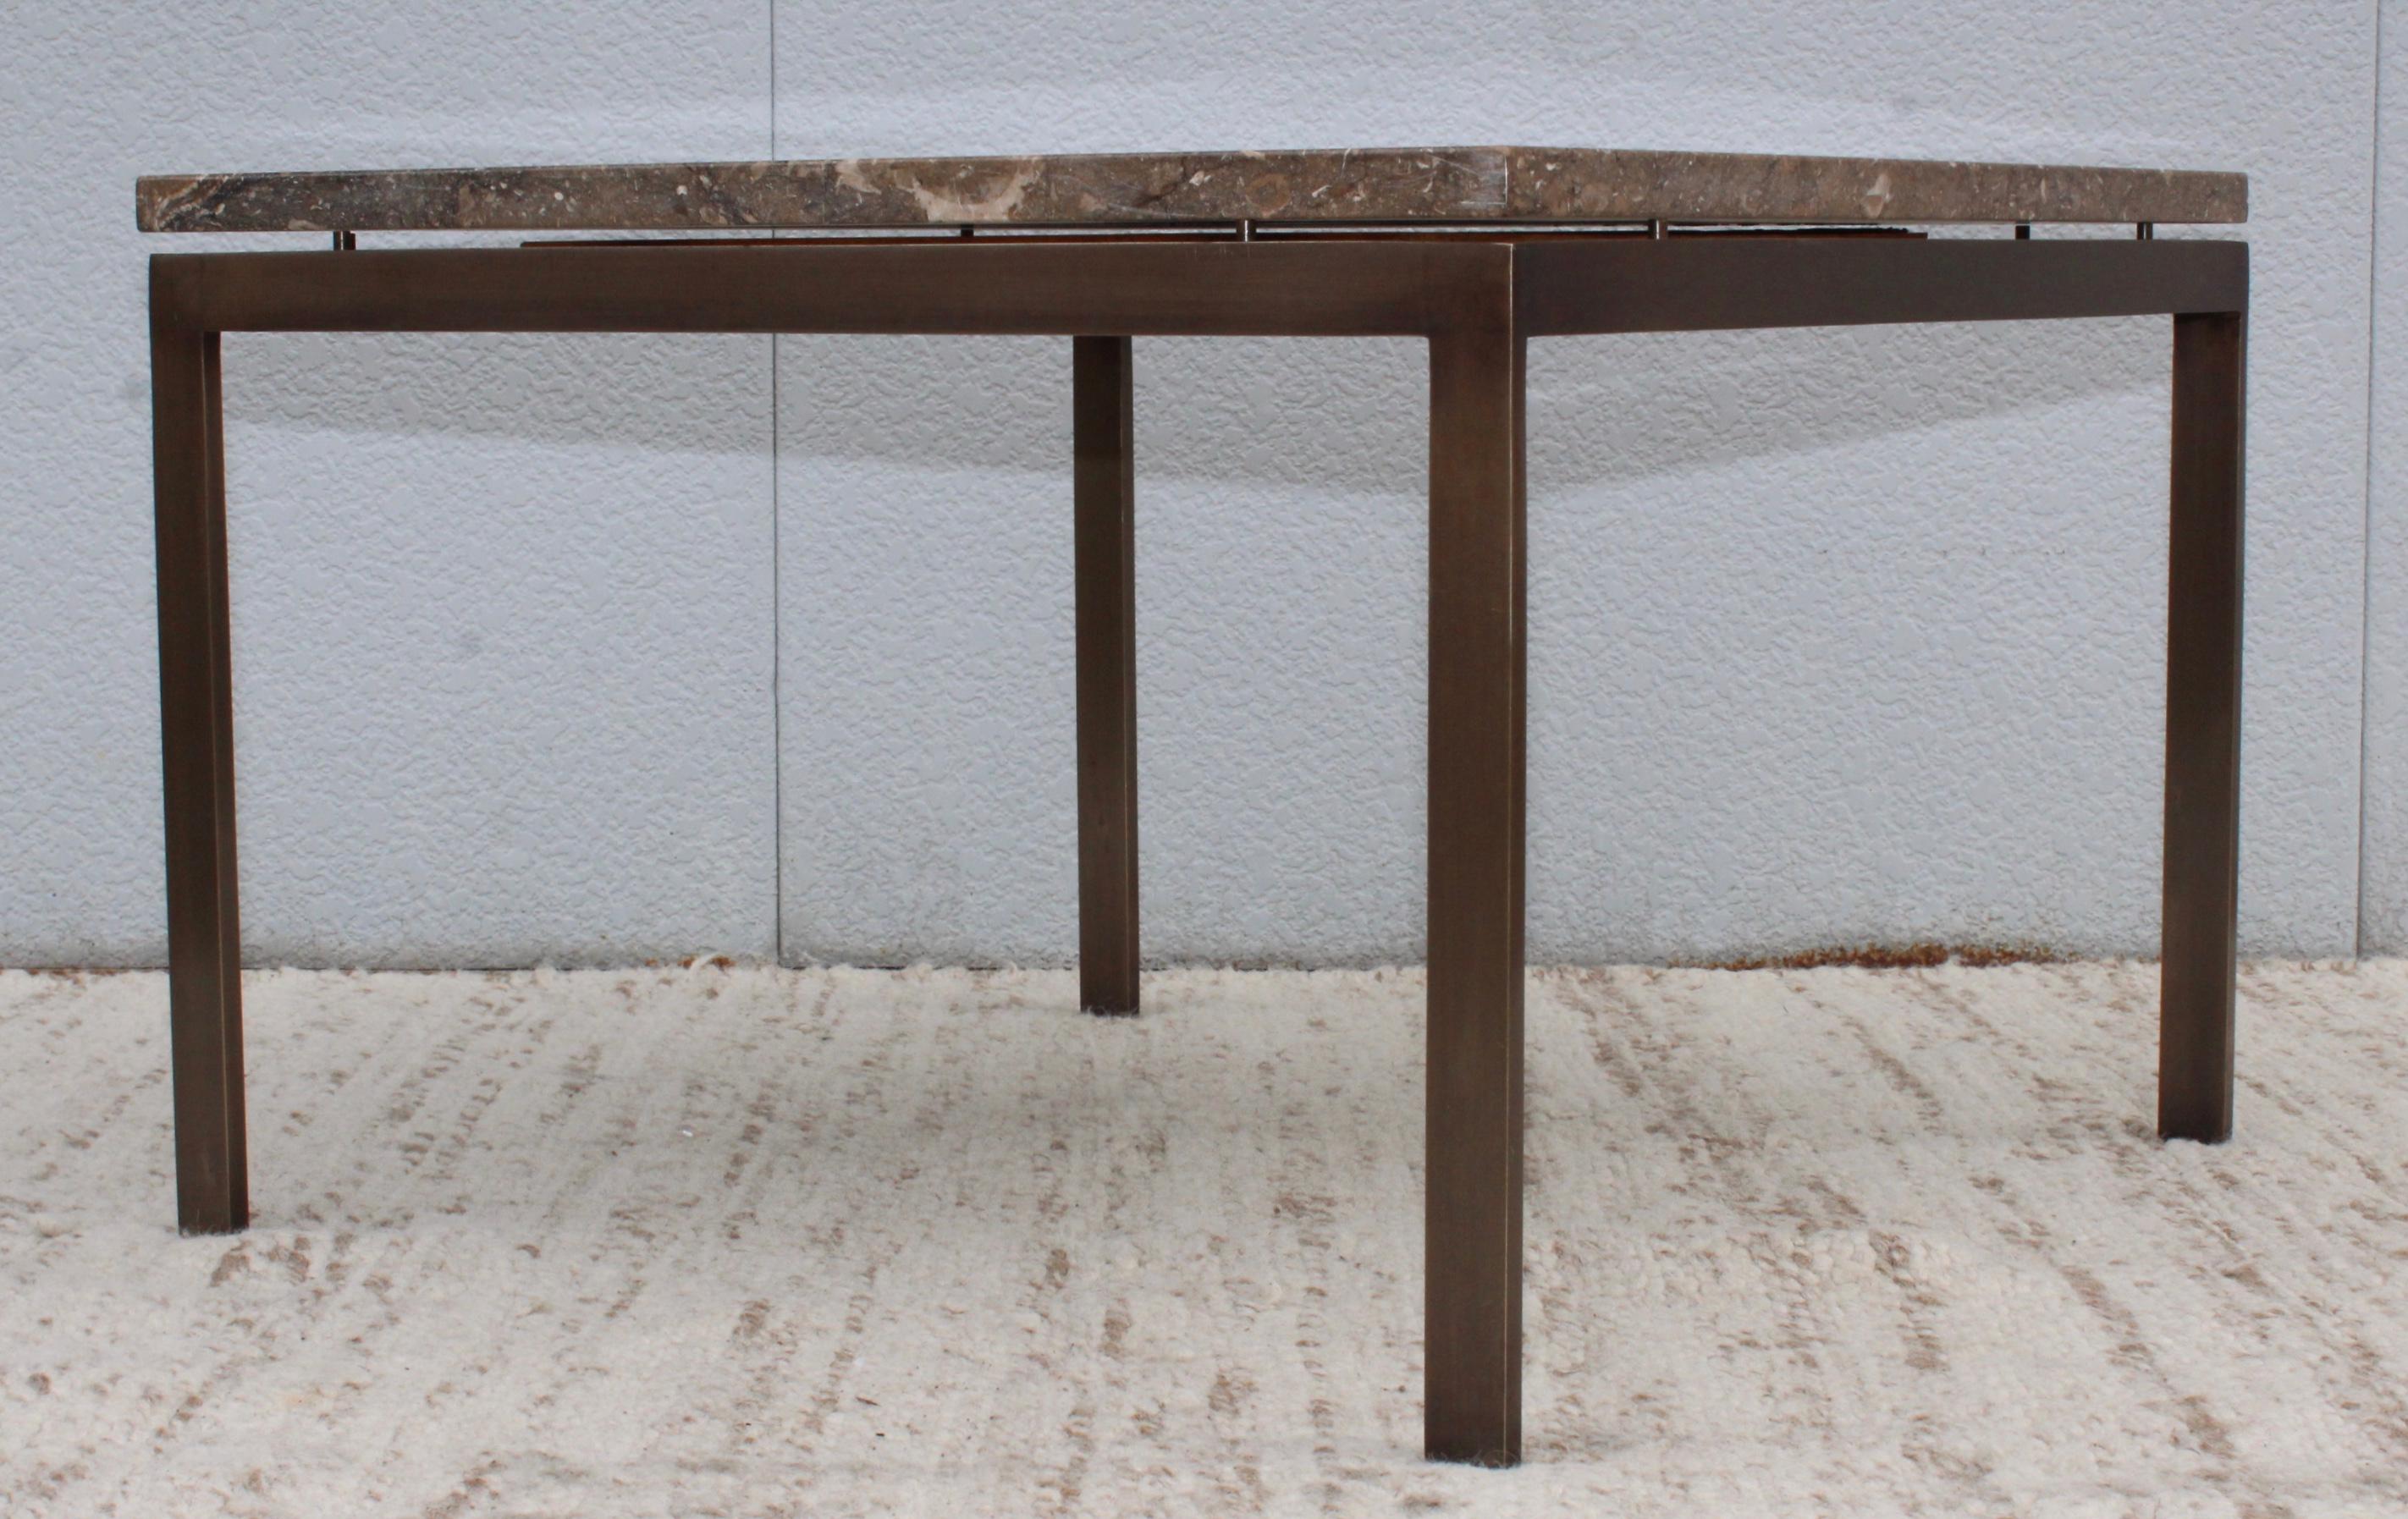 Stunning 1960's Mid-Century Modern custom made bronze base with marble top coffee table made by Cumberland Furniture Corporation for The Greenwich Savings Bank, in vintage original condition with some wear and patina to the bronze, the base is made